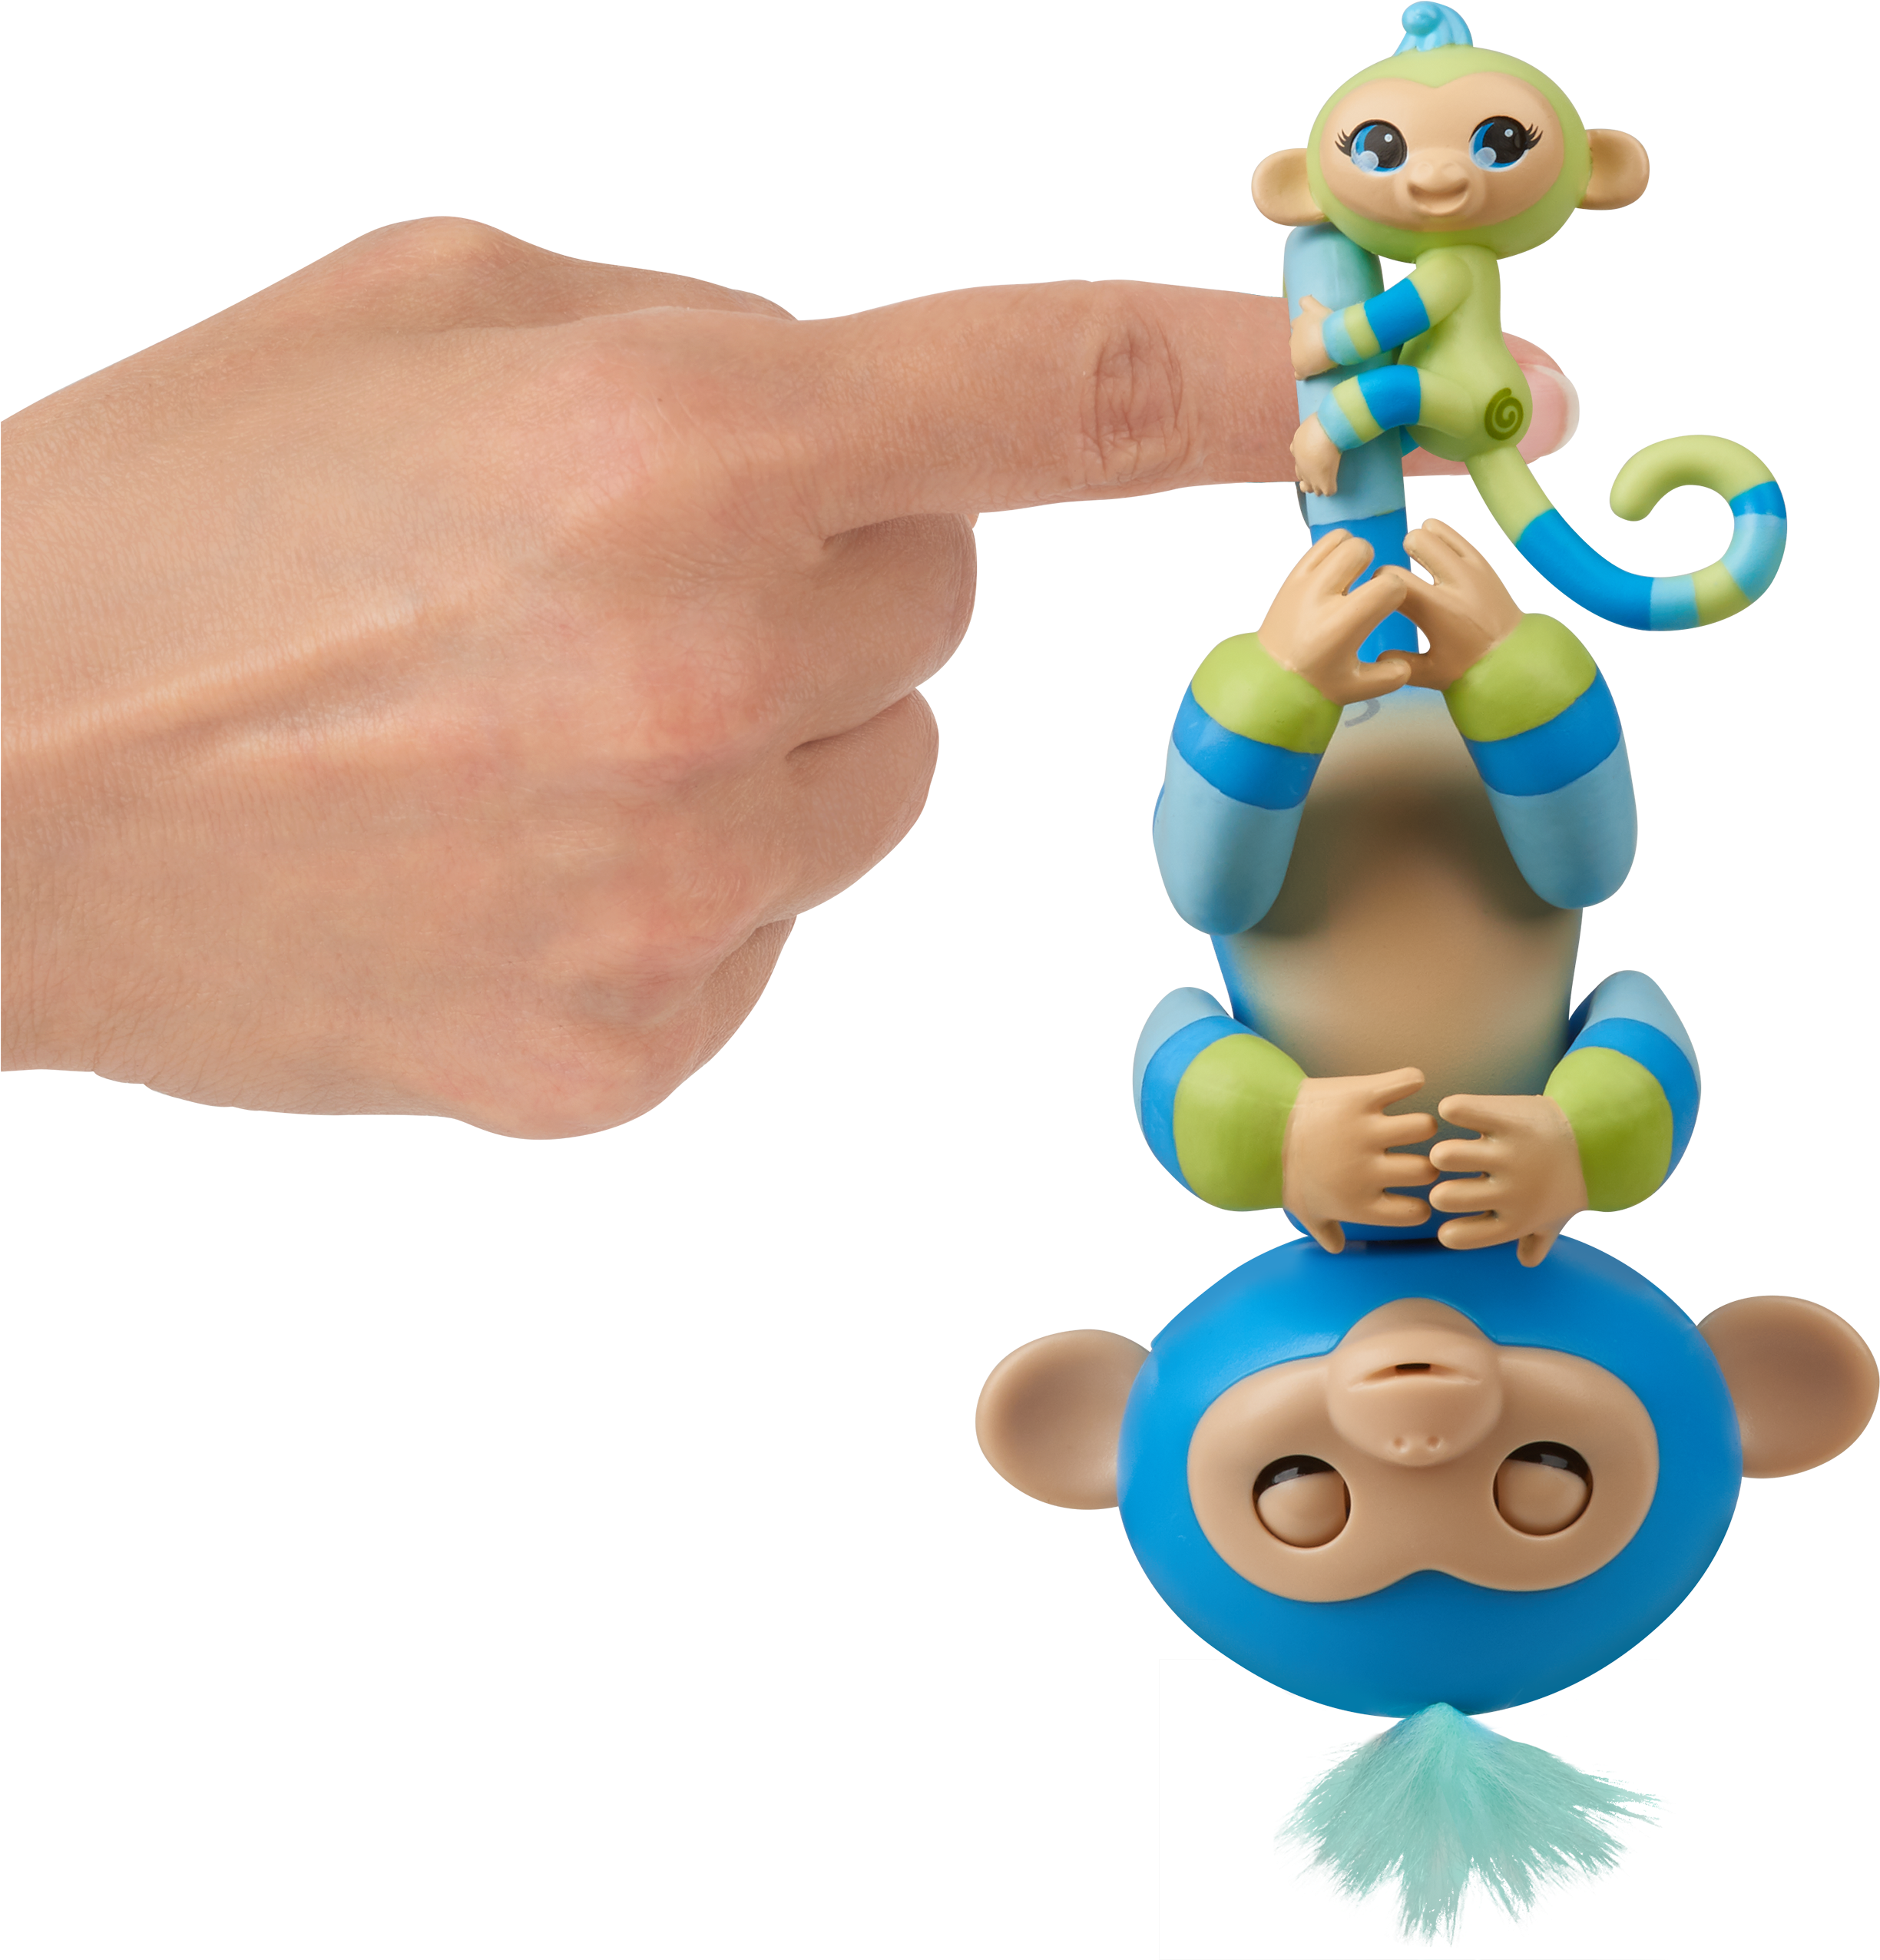 A Finger Pointing At A Toy Monkey